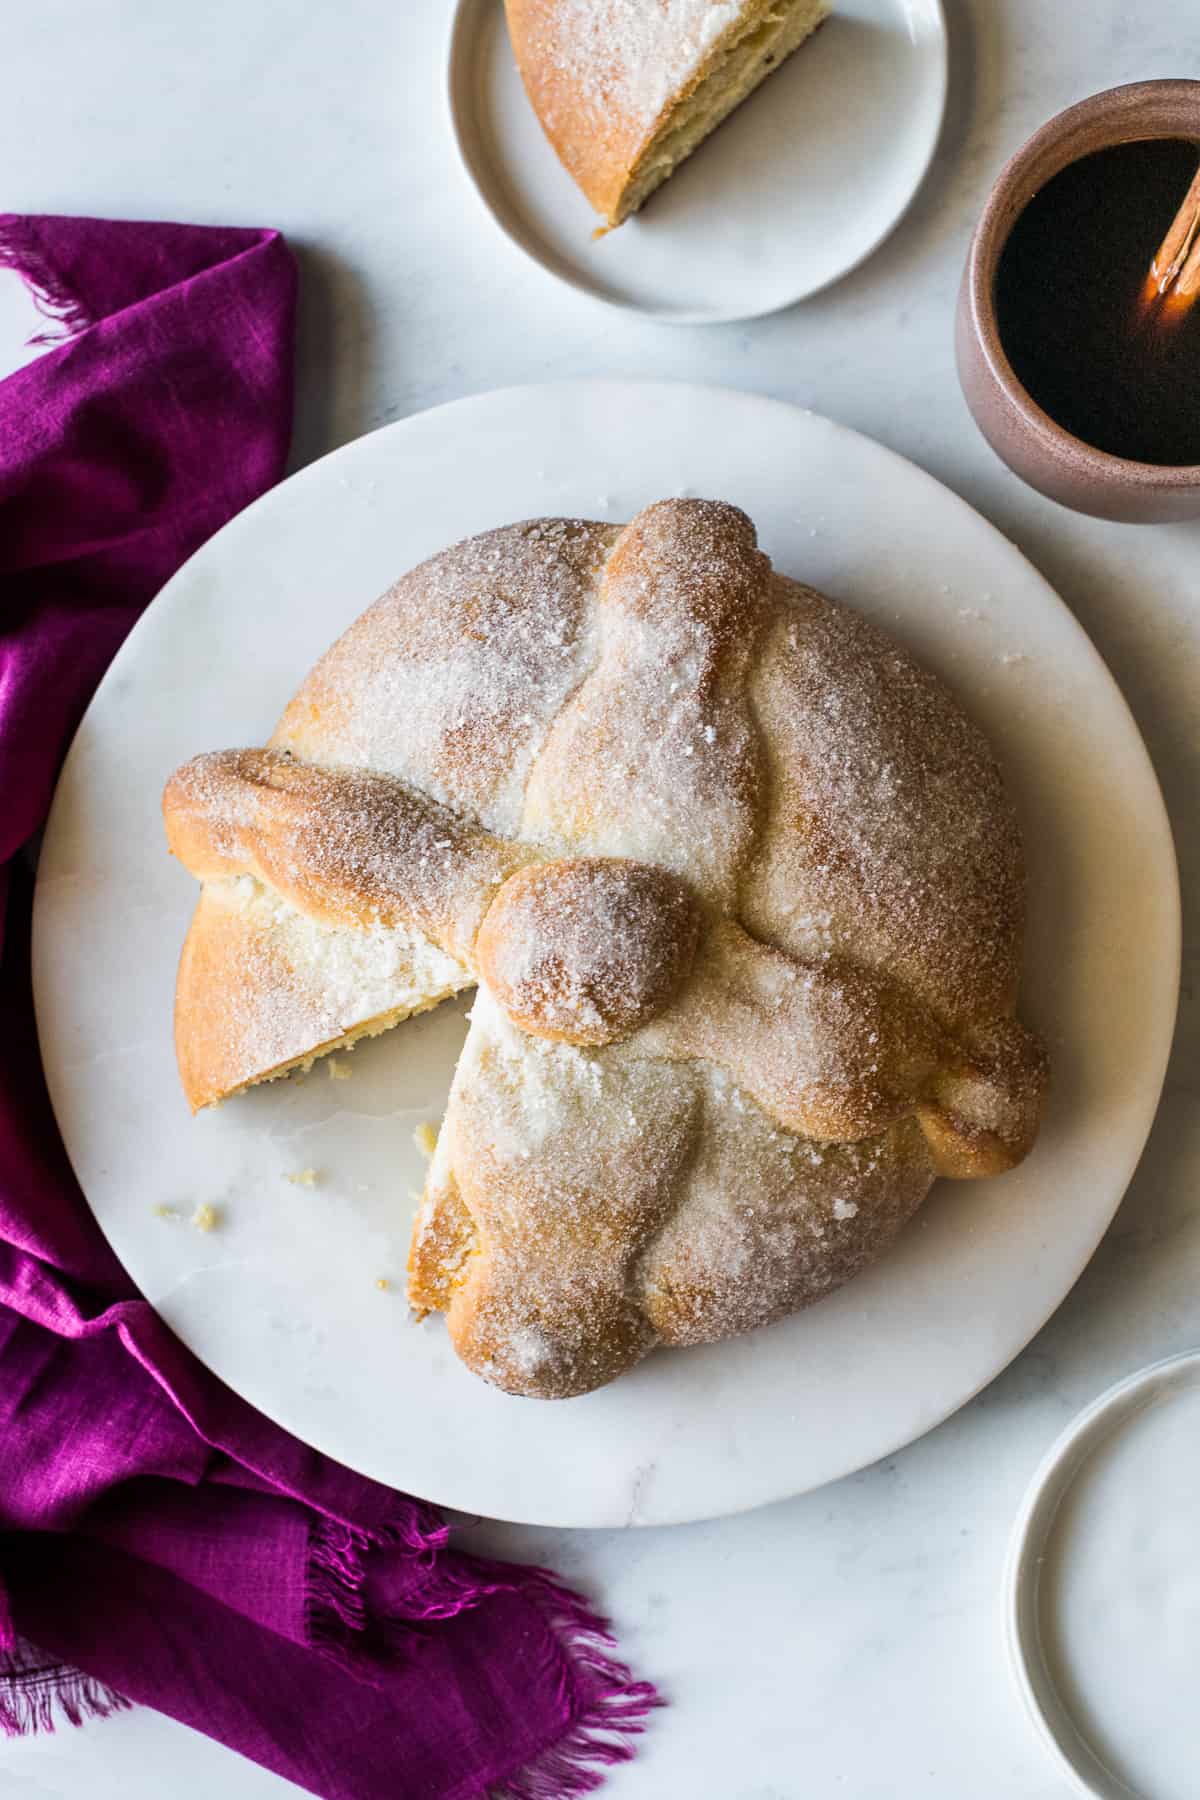 A loaf of Pan de Muerto bread garnished with sugar on top and a slice cut out ready to eat.